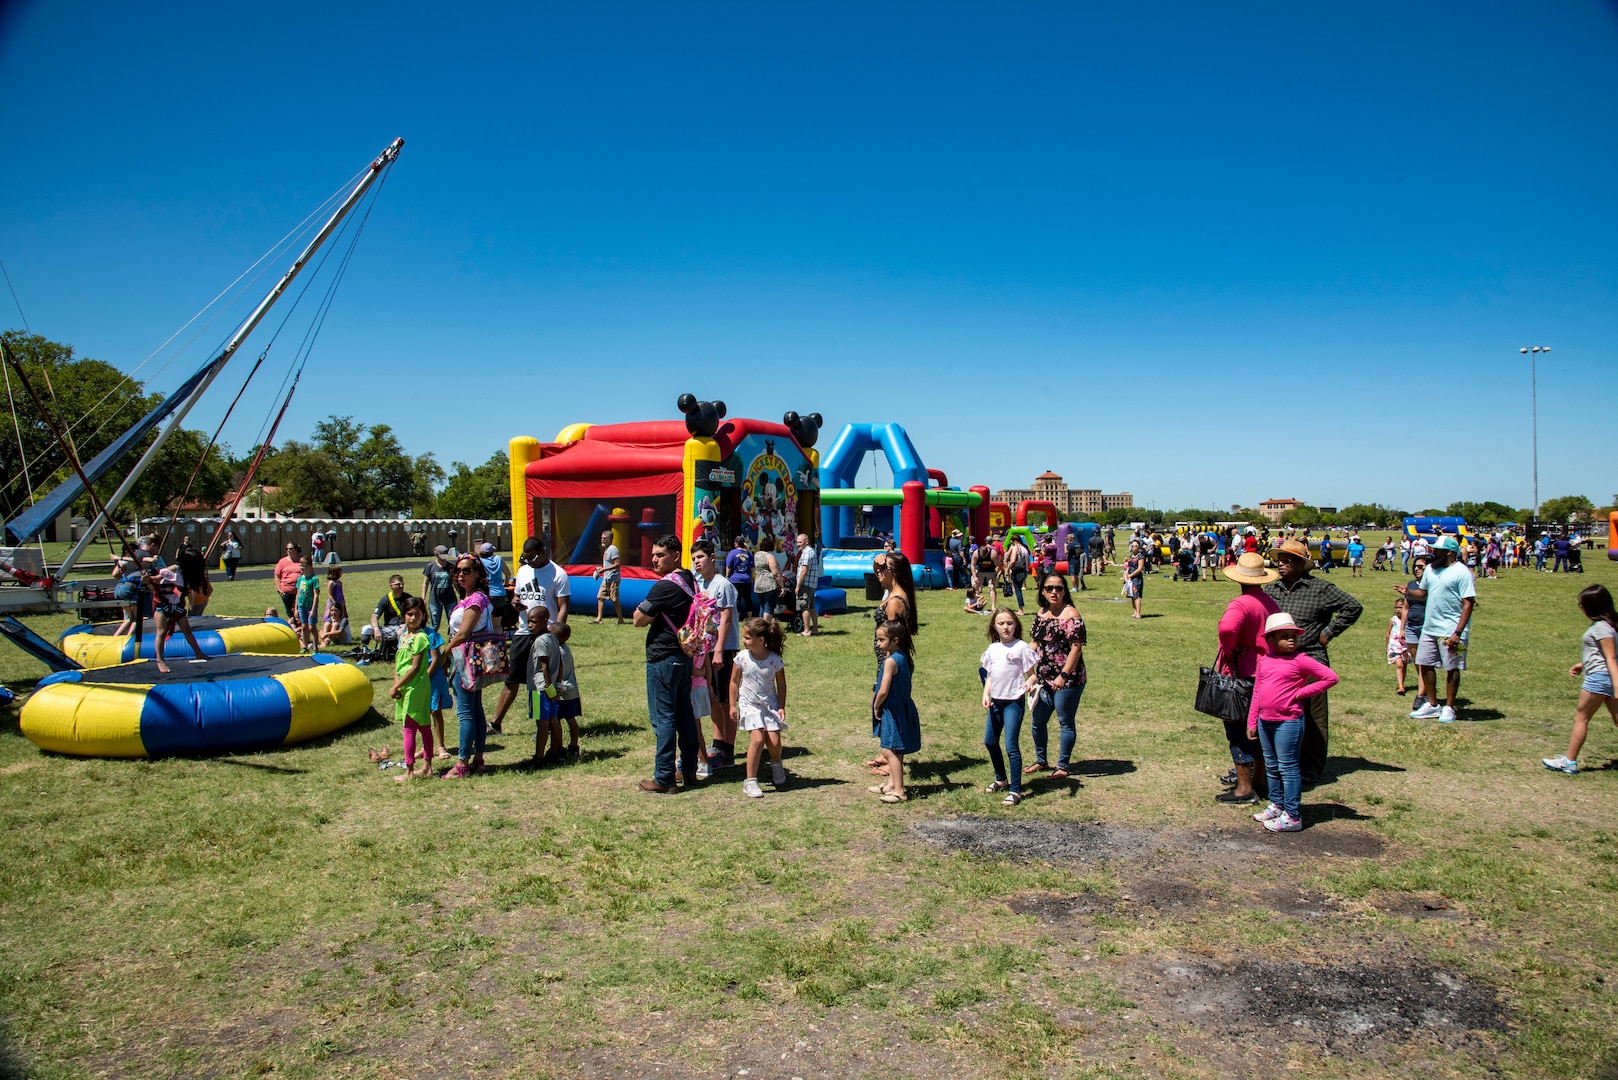 Families check out the attractions April 20, 2019, at Joint Base San Antonio-Fort Sam Houston, Texas during the Fiesta and Fireworks Extravaganza. Fiesta honors the long-standing partnership between the U.S. military and San Antonio in annual Fiesta events, which commemorate Texas’ independence after the Battle of San Jacinto and the Alamo.  (U.S. Air Force photo by Senior Airman Stormy Archer)